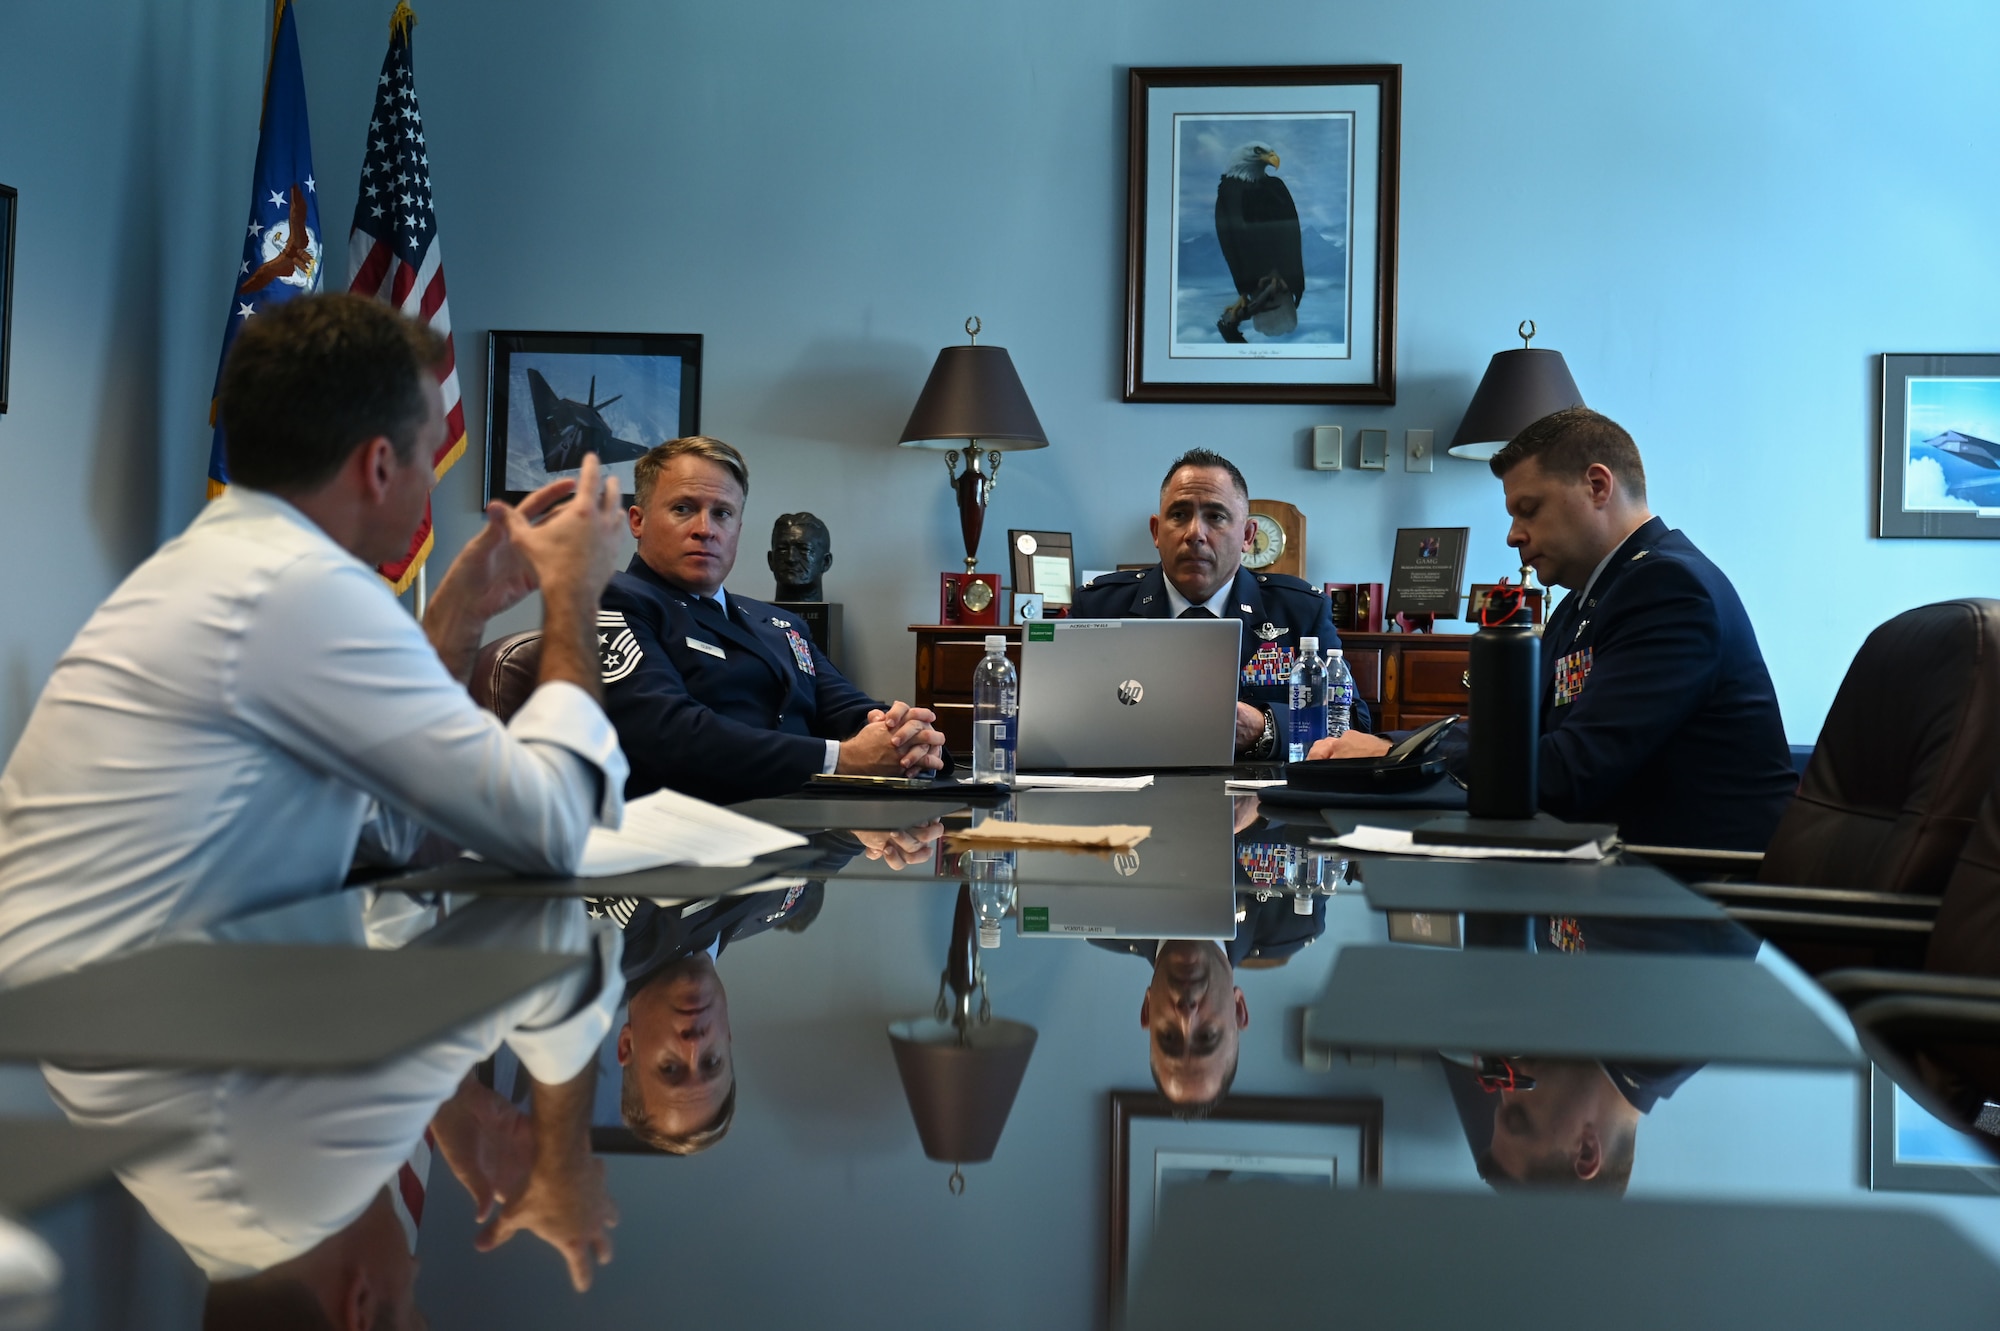 U.S. Air Force Chief Master Sgt. William Cupp, 350th Spectrum Warfare Wing command chief, left, U.S. Air Force Col. Josh Koslov, 350th SWW commander, center, and U.S. Air Force Lt. Col. Christopher Ryan Cox, 350th SWW, Det 1 and 87th Electronic Warfare Squadron, Det 1 commander, host a media roundtable at Robin Air Force Base, GA, Oct. 25, 2023. The existence of the wing and the establishment of new units signify the Department of Defense’s commitment to achieving EMS supremacy. (U.S. Air Force photo by Staff Sgt. Ericka A. Woolever)